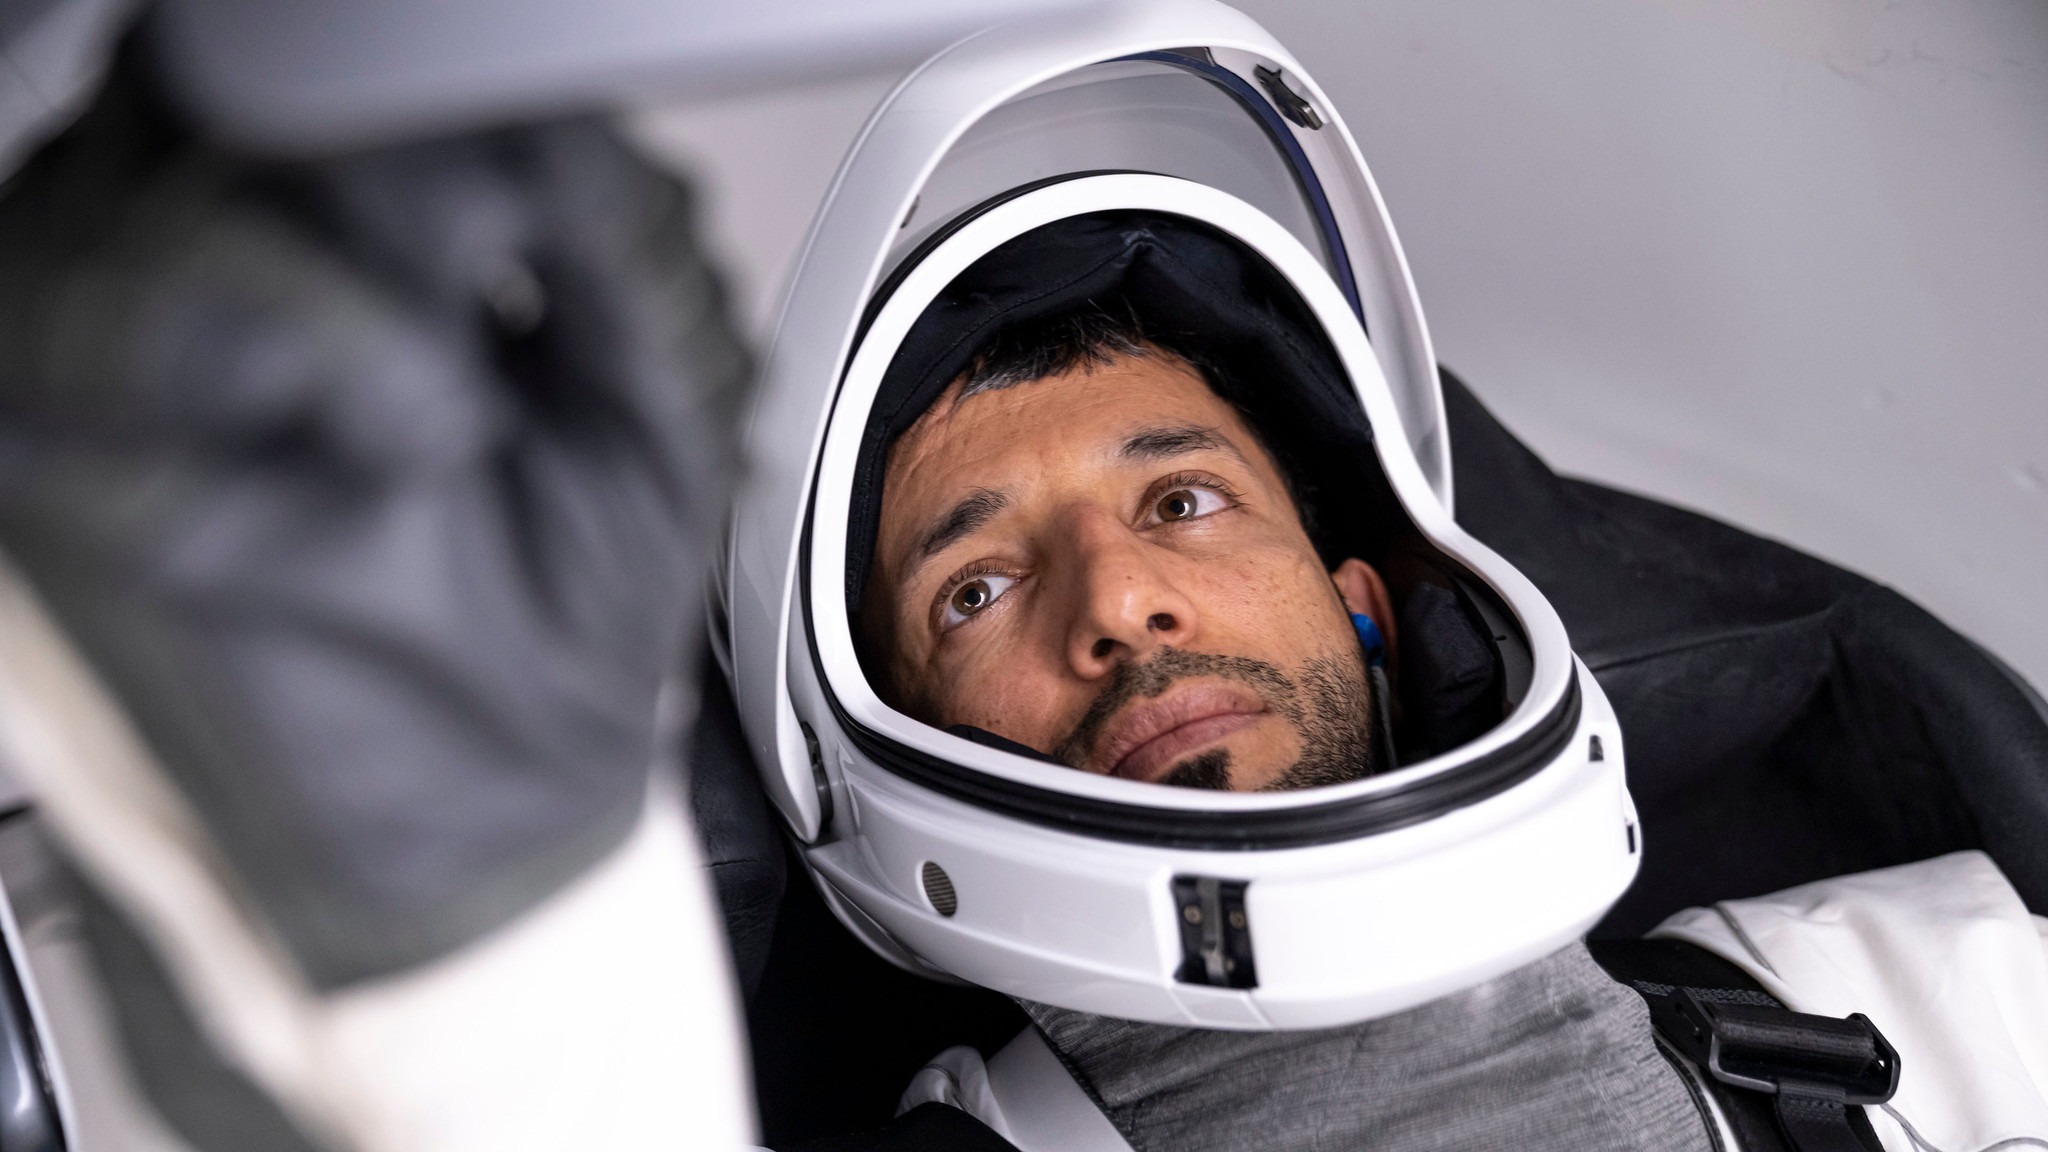 UAE astronaut on SpaceX Crew-6 mission will spend Ramadan in space